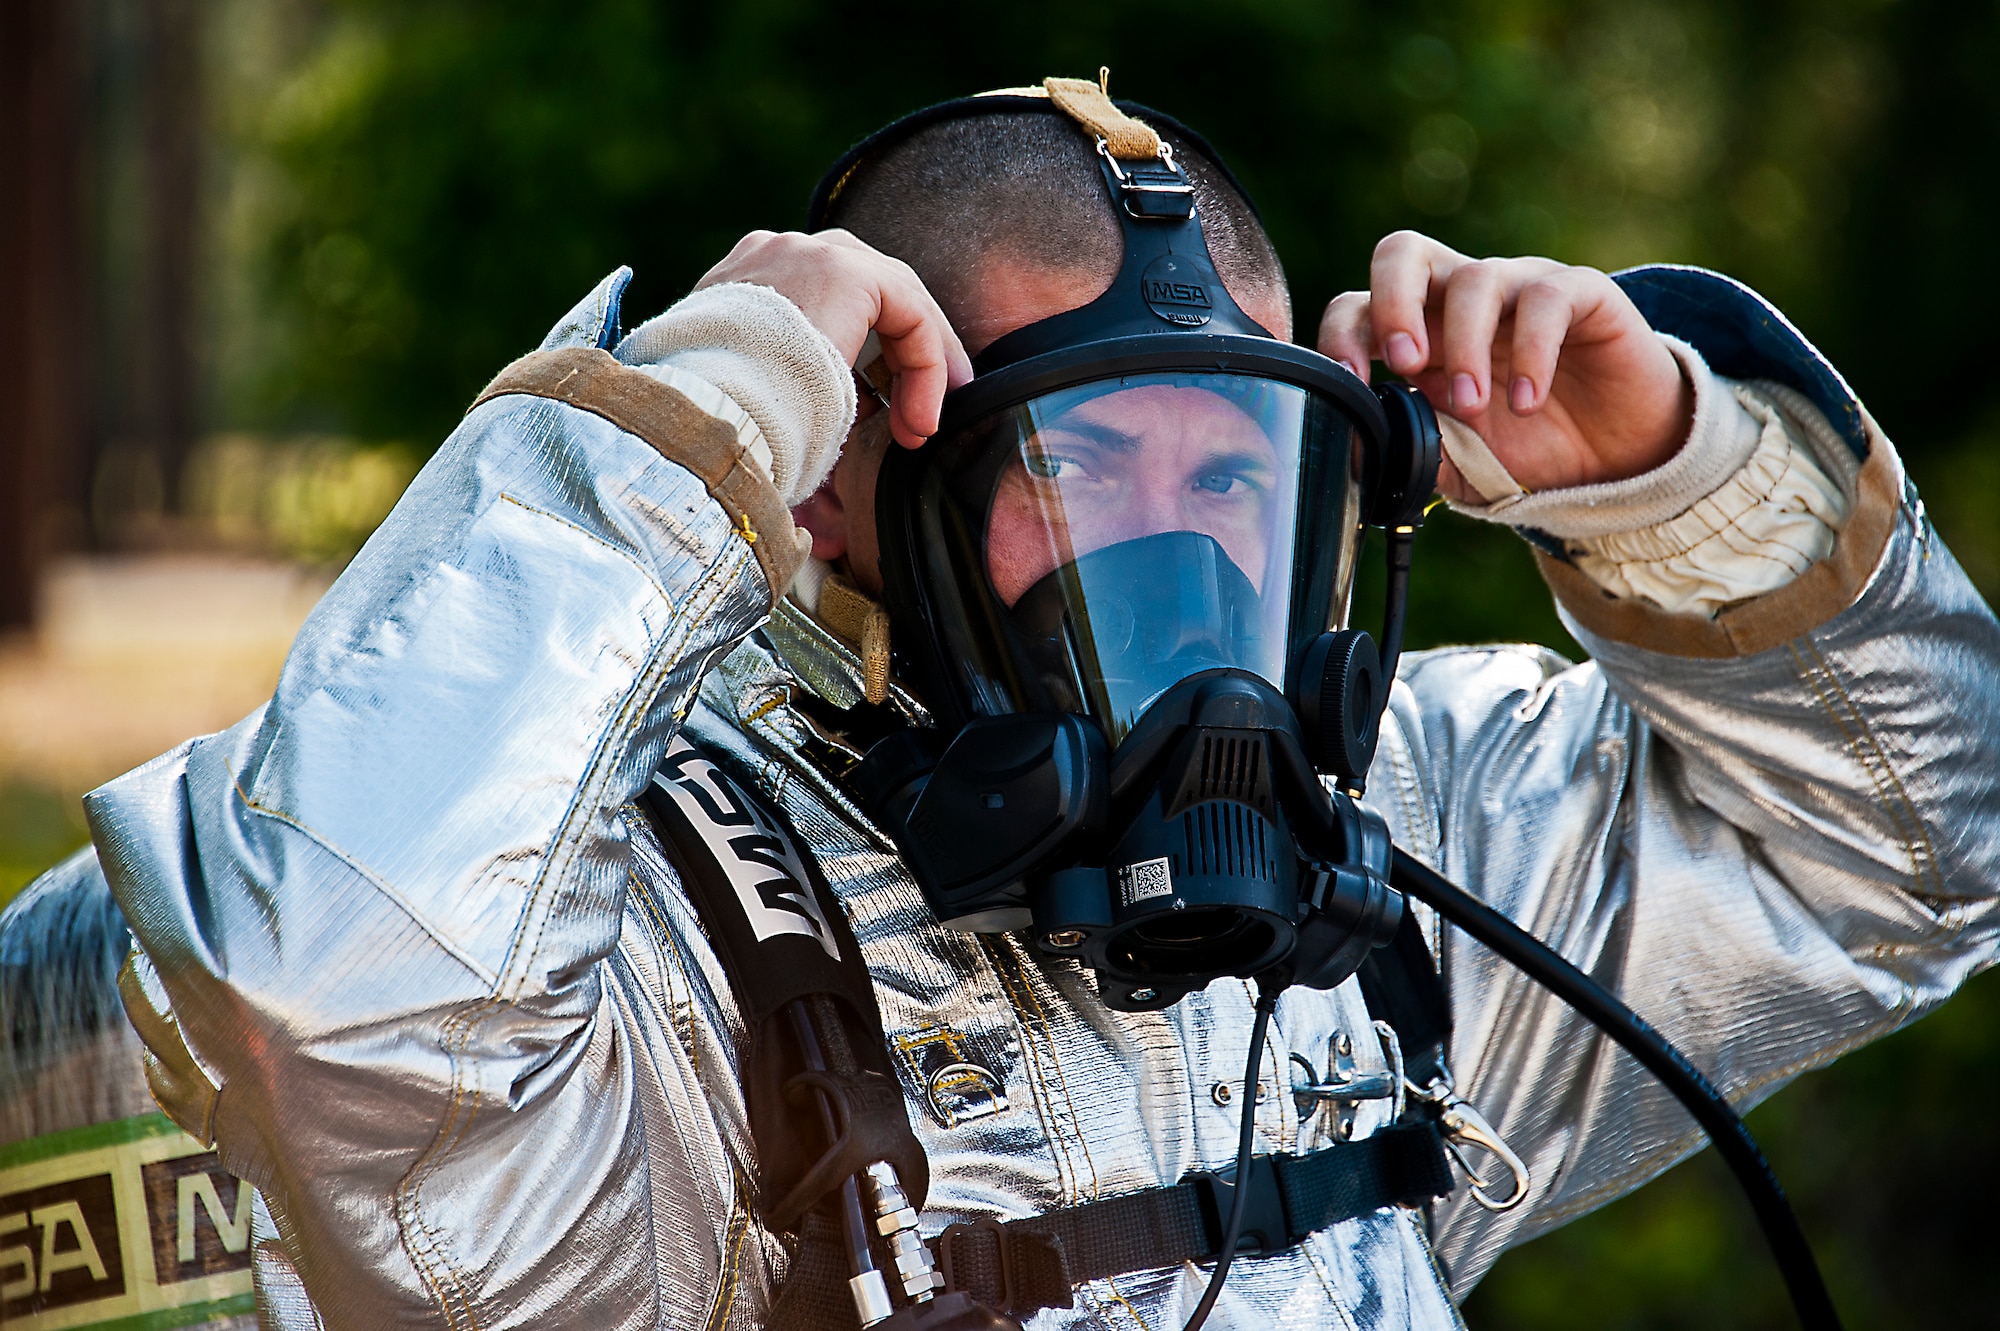 Senior Airman Samuel Cameron, a 919th Special Operations Wing firefighter, adjusts his gas mask prior to battling a blaze during an aircraft fire training scenario at Hurlburt Field, Fla., April 13.  More than 10 of Duke Field’s firemen braved the flames of the aircraft burn pit for this annual refresher training.  (U.S. Air Force photo/Tech. Sgt. Samuel King Jr.)